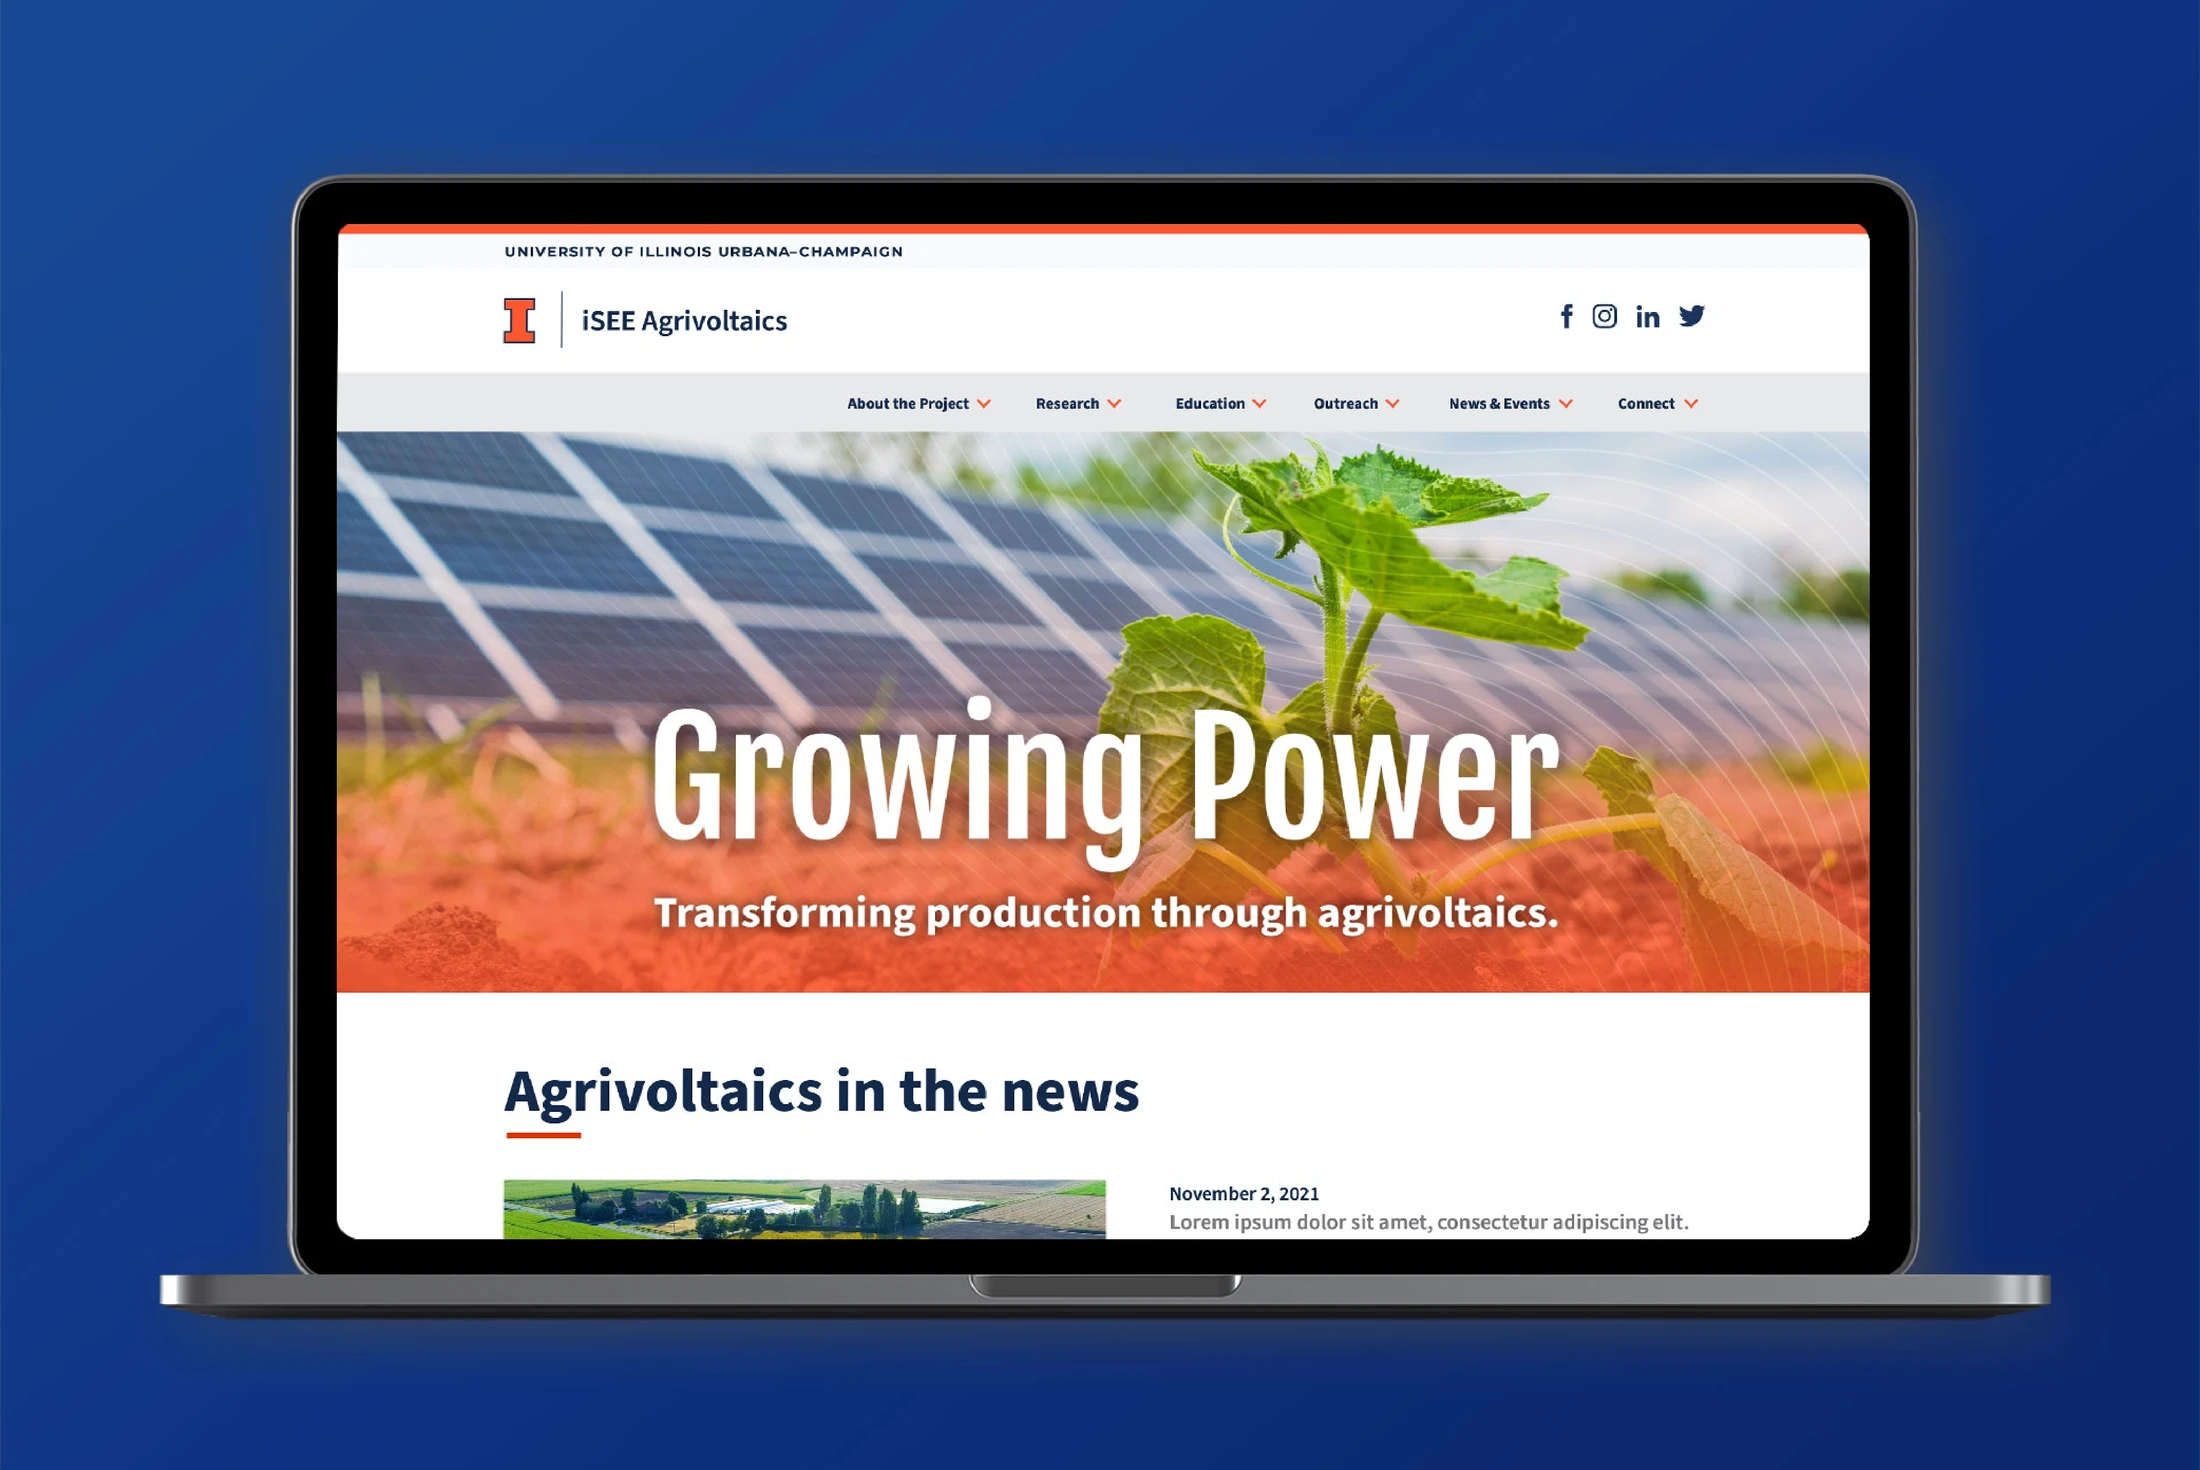 A laptop screen showing the website for agriculturists in the news.